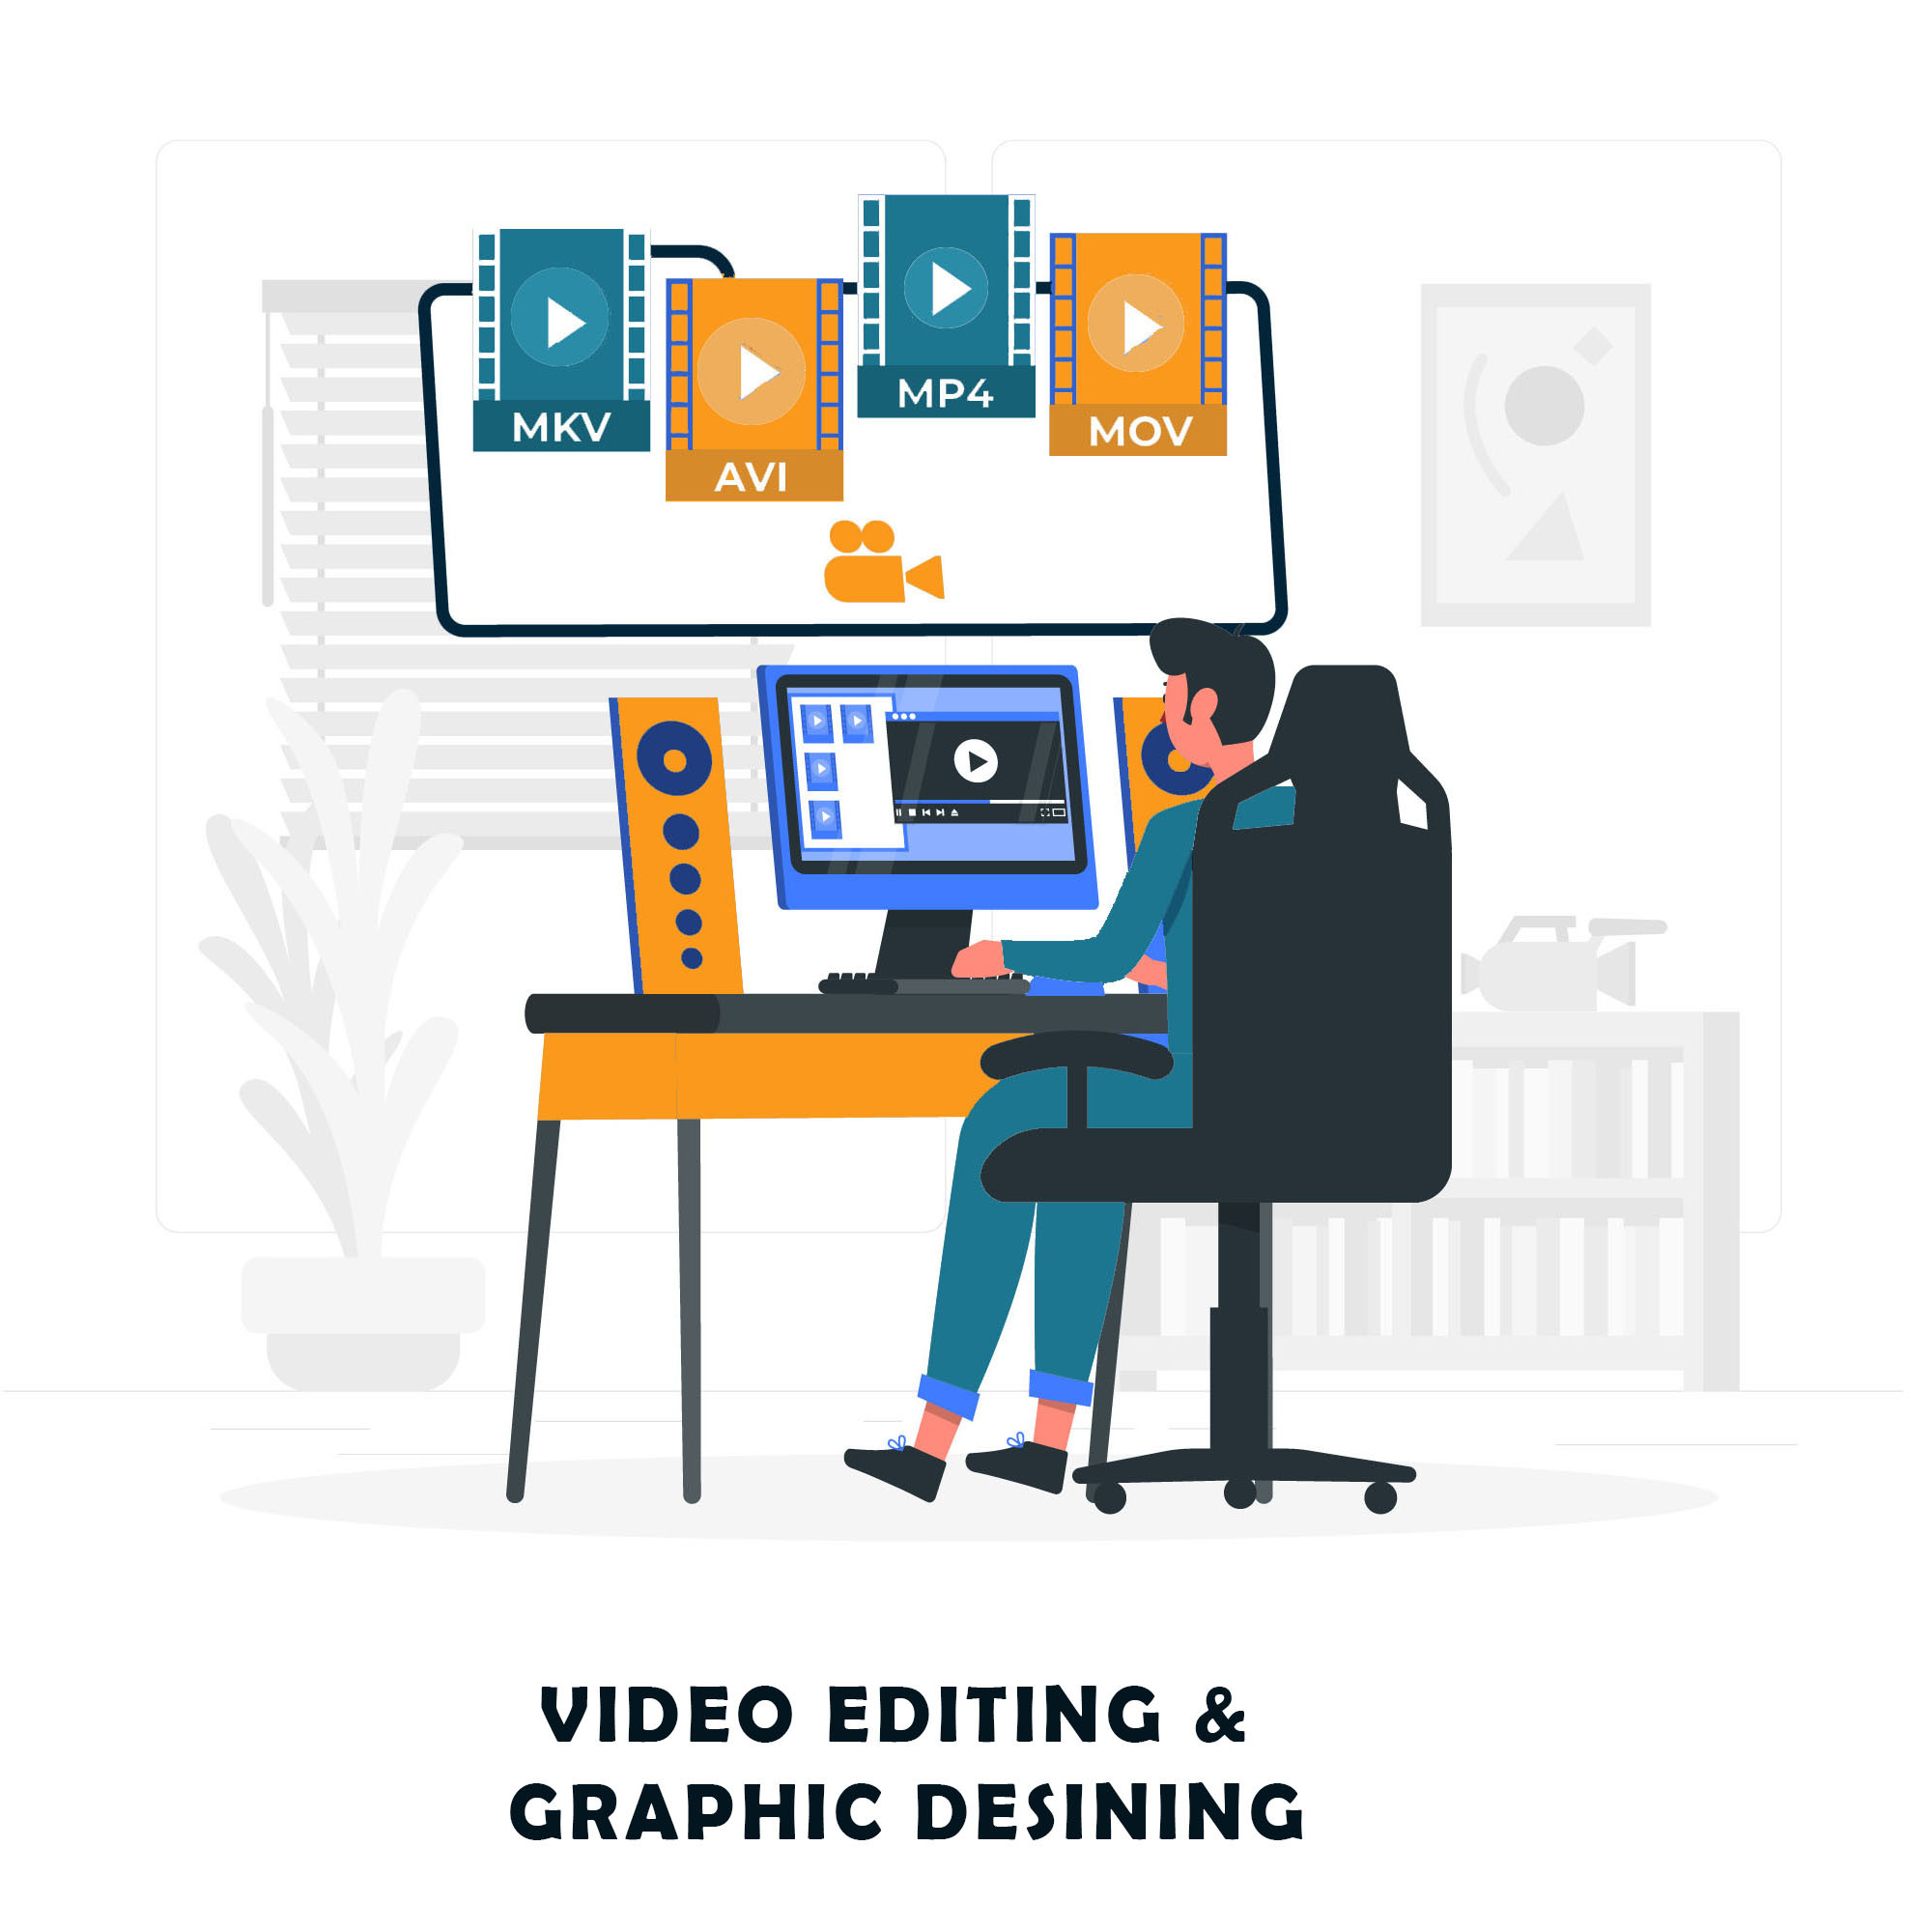 VIDEO EDITING AND GRAPHIC DESINGING